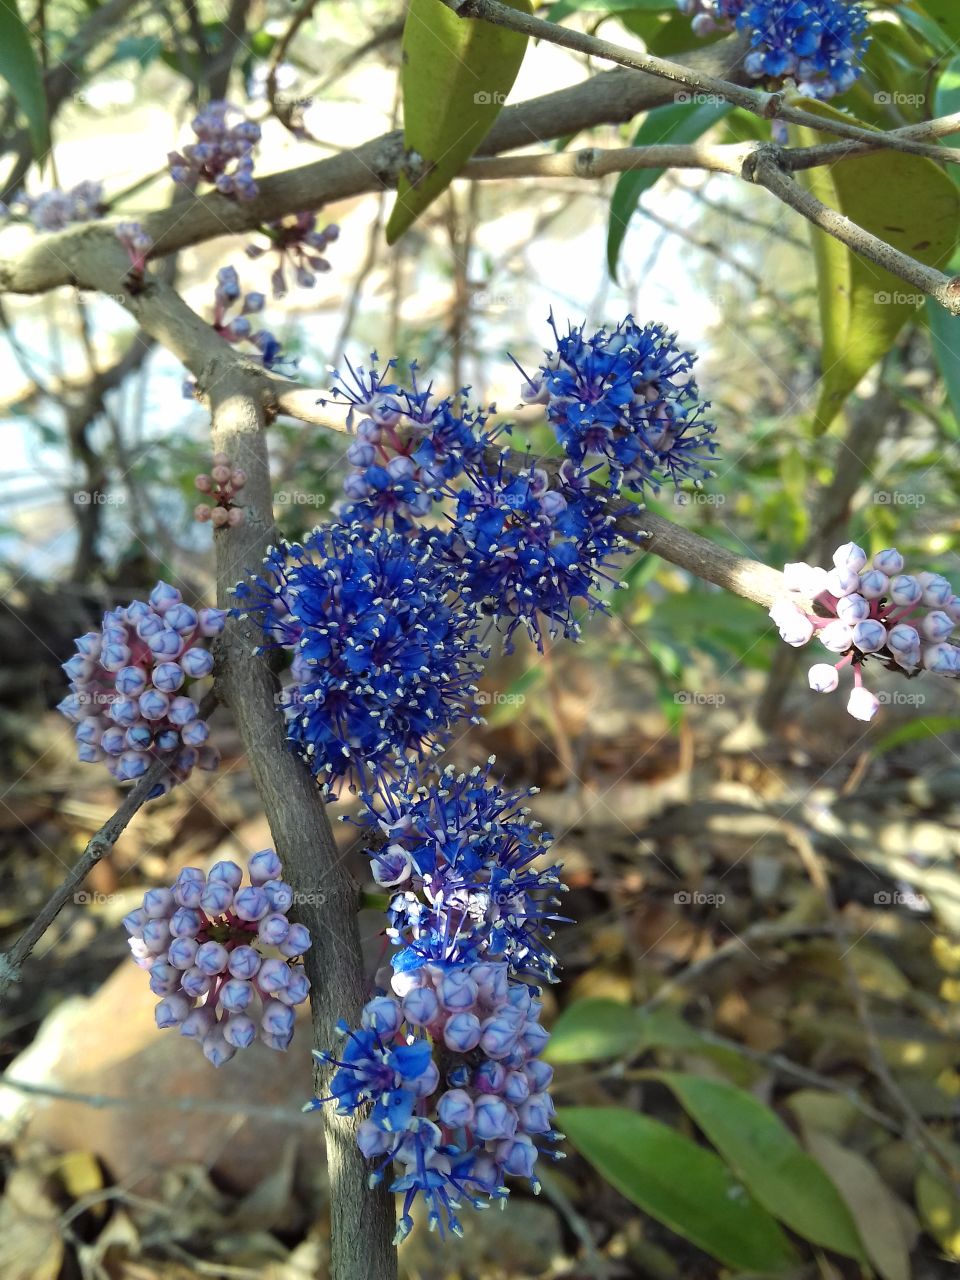 Bunch of blue flowers blooming on tree